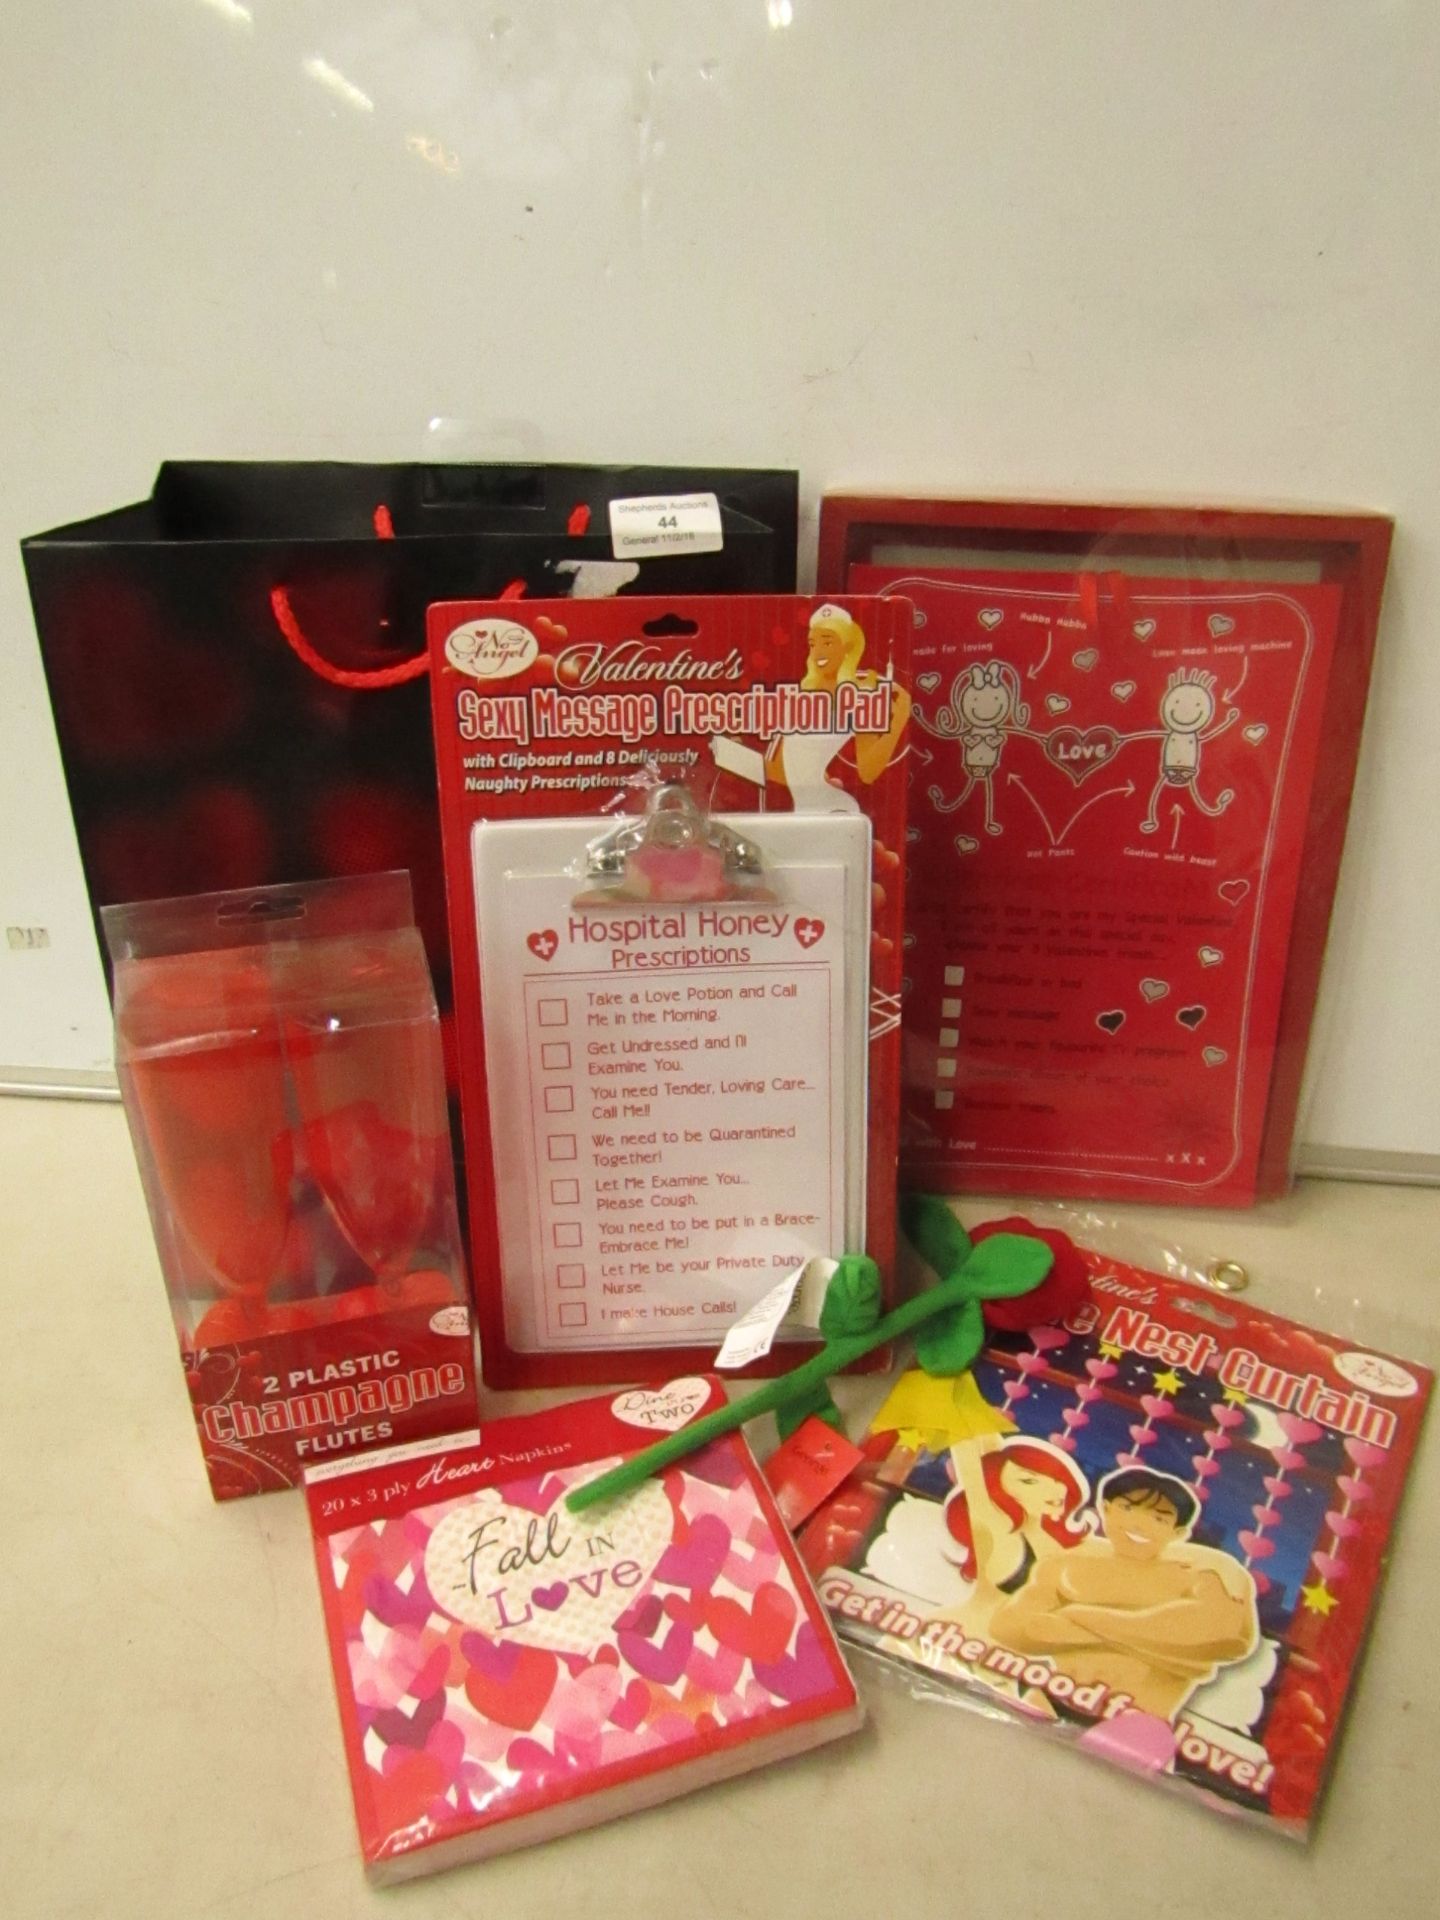 7 Piece Valentines Gift set which includes, Gift Bag, Certificate, Sexy Message Prescription Pad,